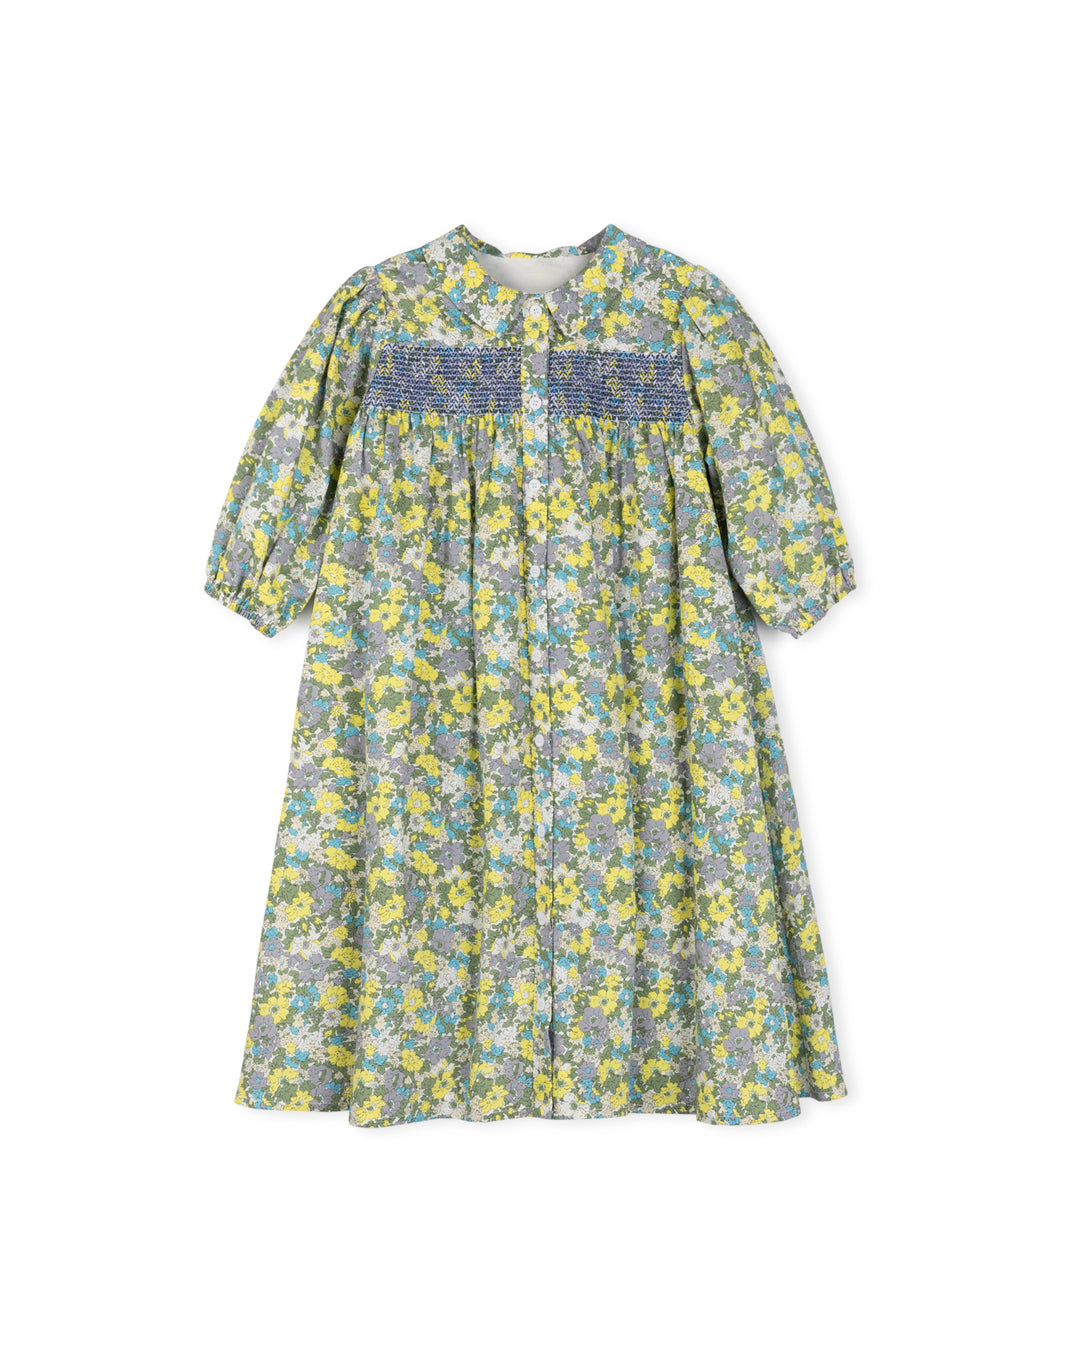 PAPILLON YELLOW FLORAL SMOCKED DRESS [FINAL SALE]